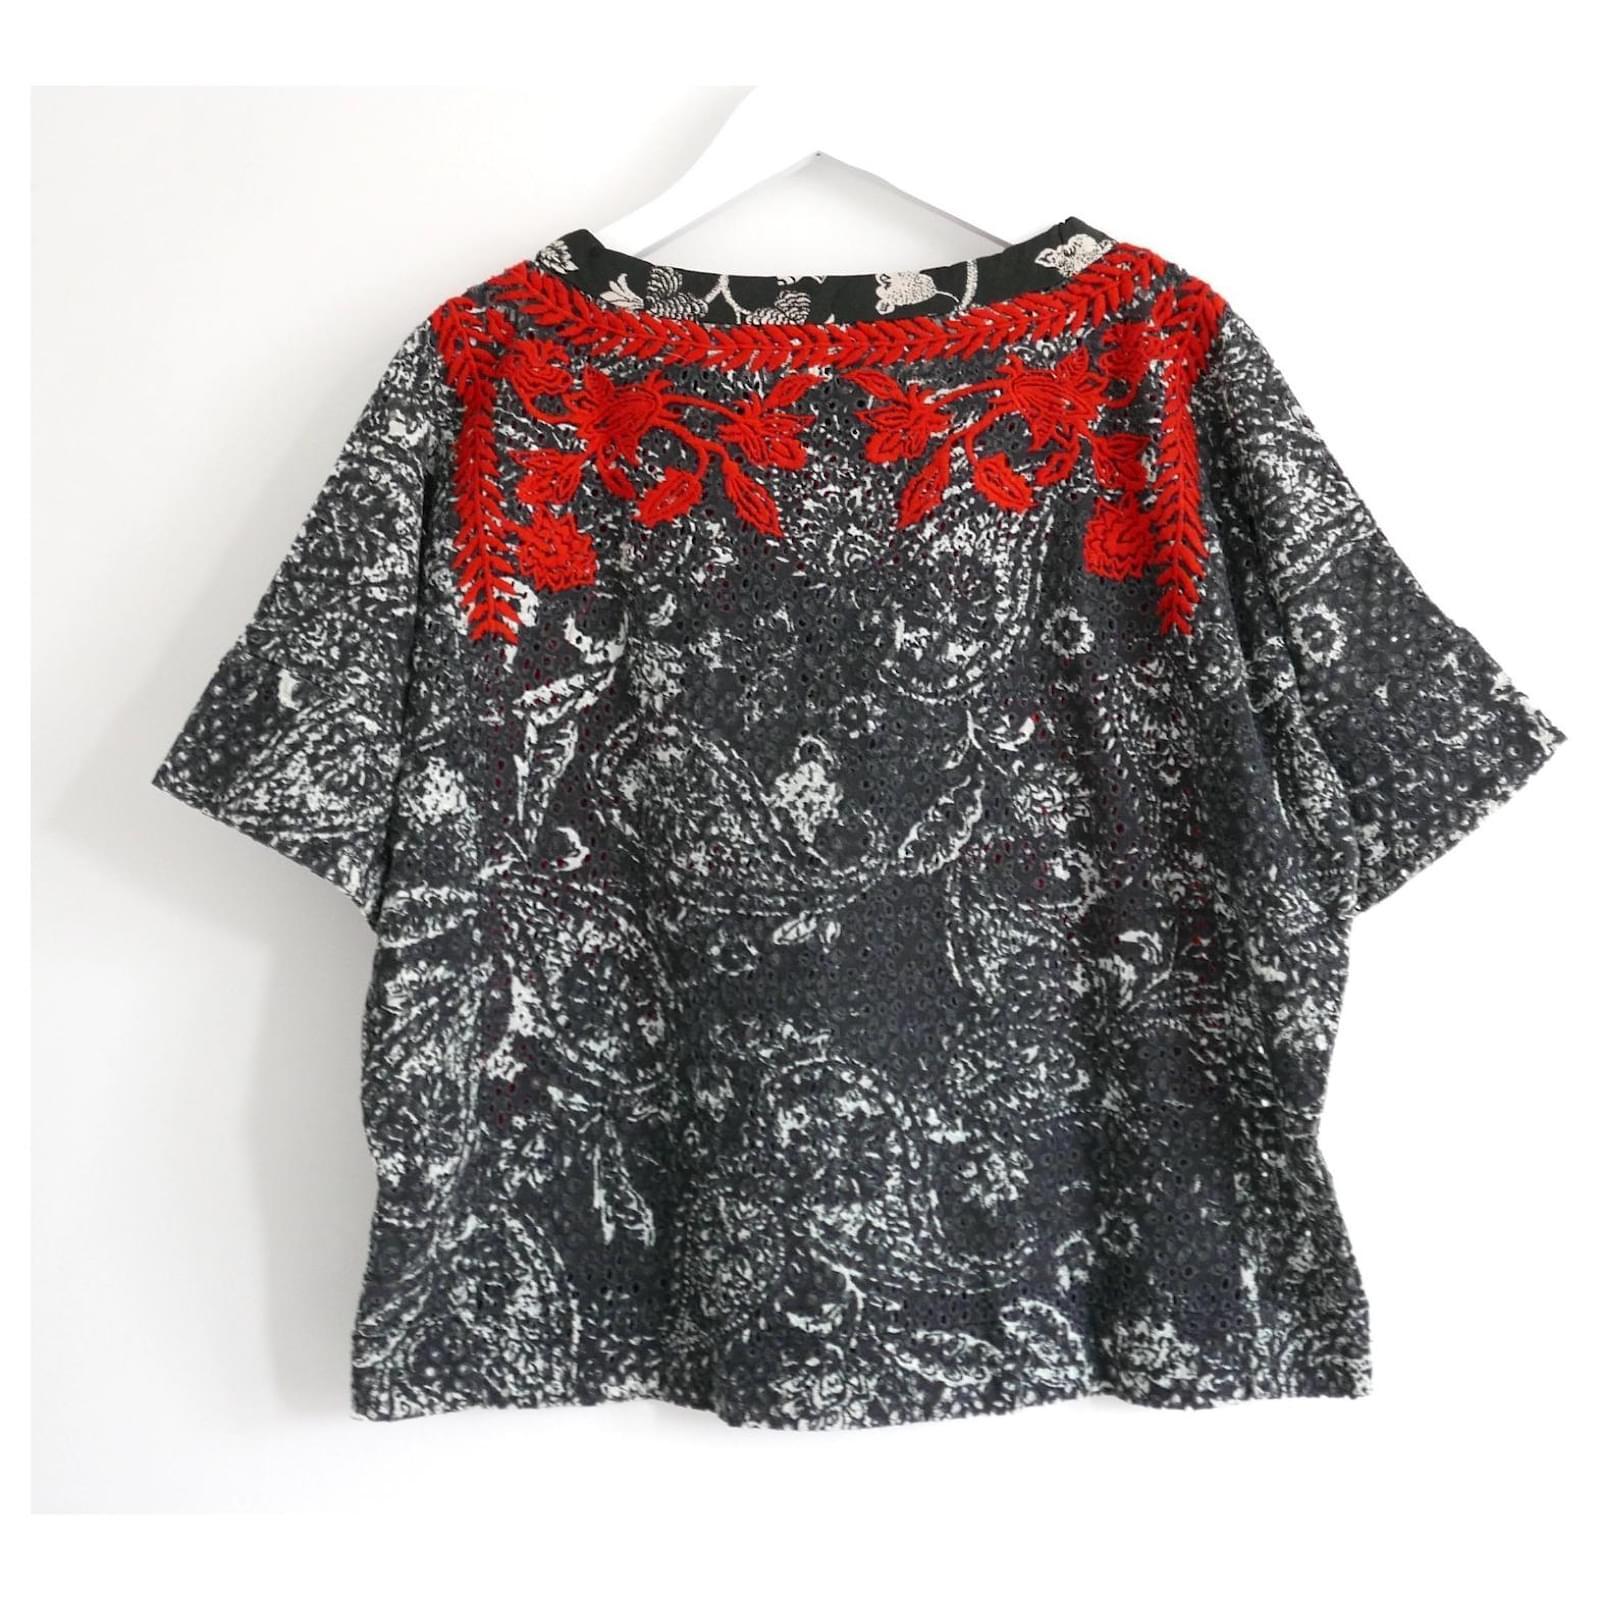 Gorgeous archival Isabel Marant top from the SS13 collection. Made from grey and cream blurry print punched texture cotton with red embroidery to the shoulders and sleeves. Size FR40/UK12. Approx measurements - bust 46”, waist 42” and length 21”.
